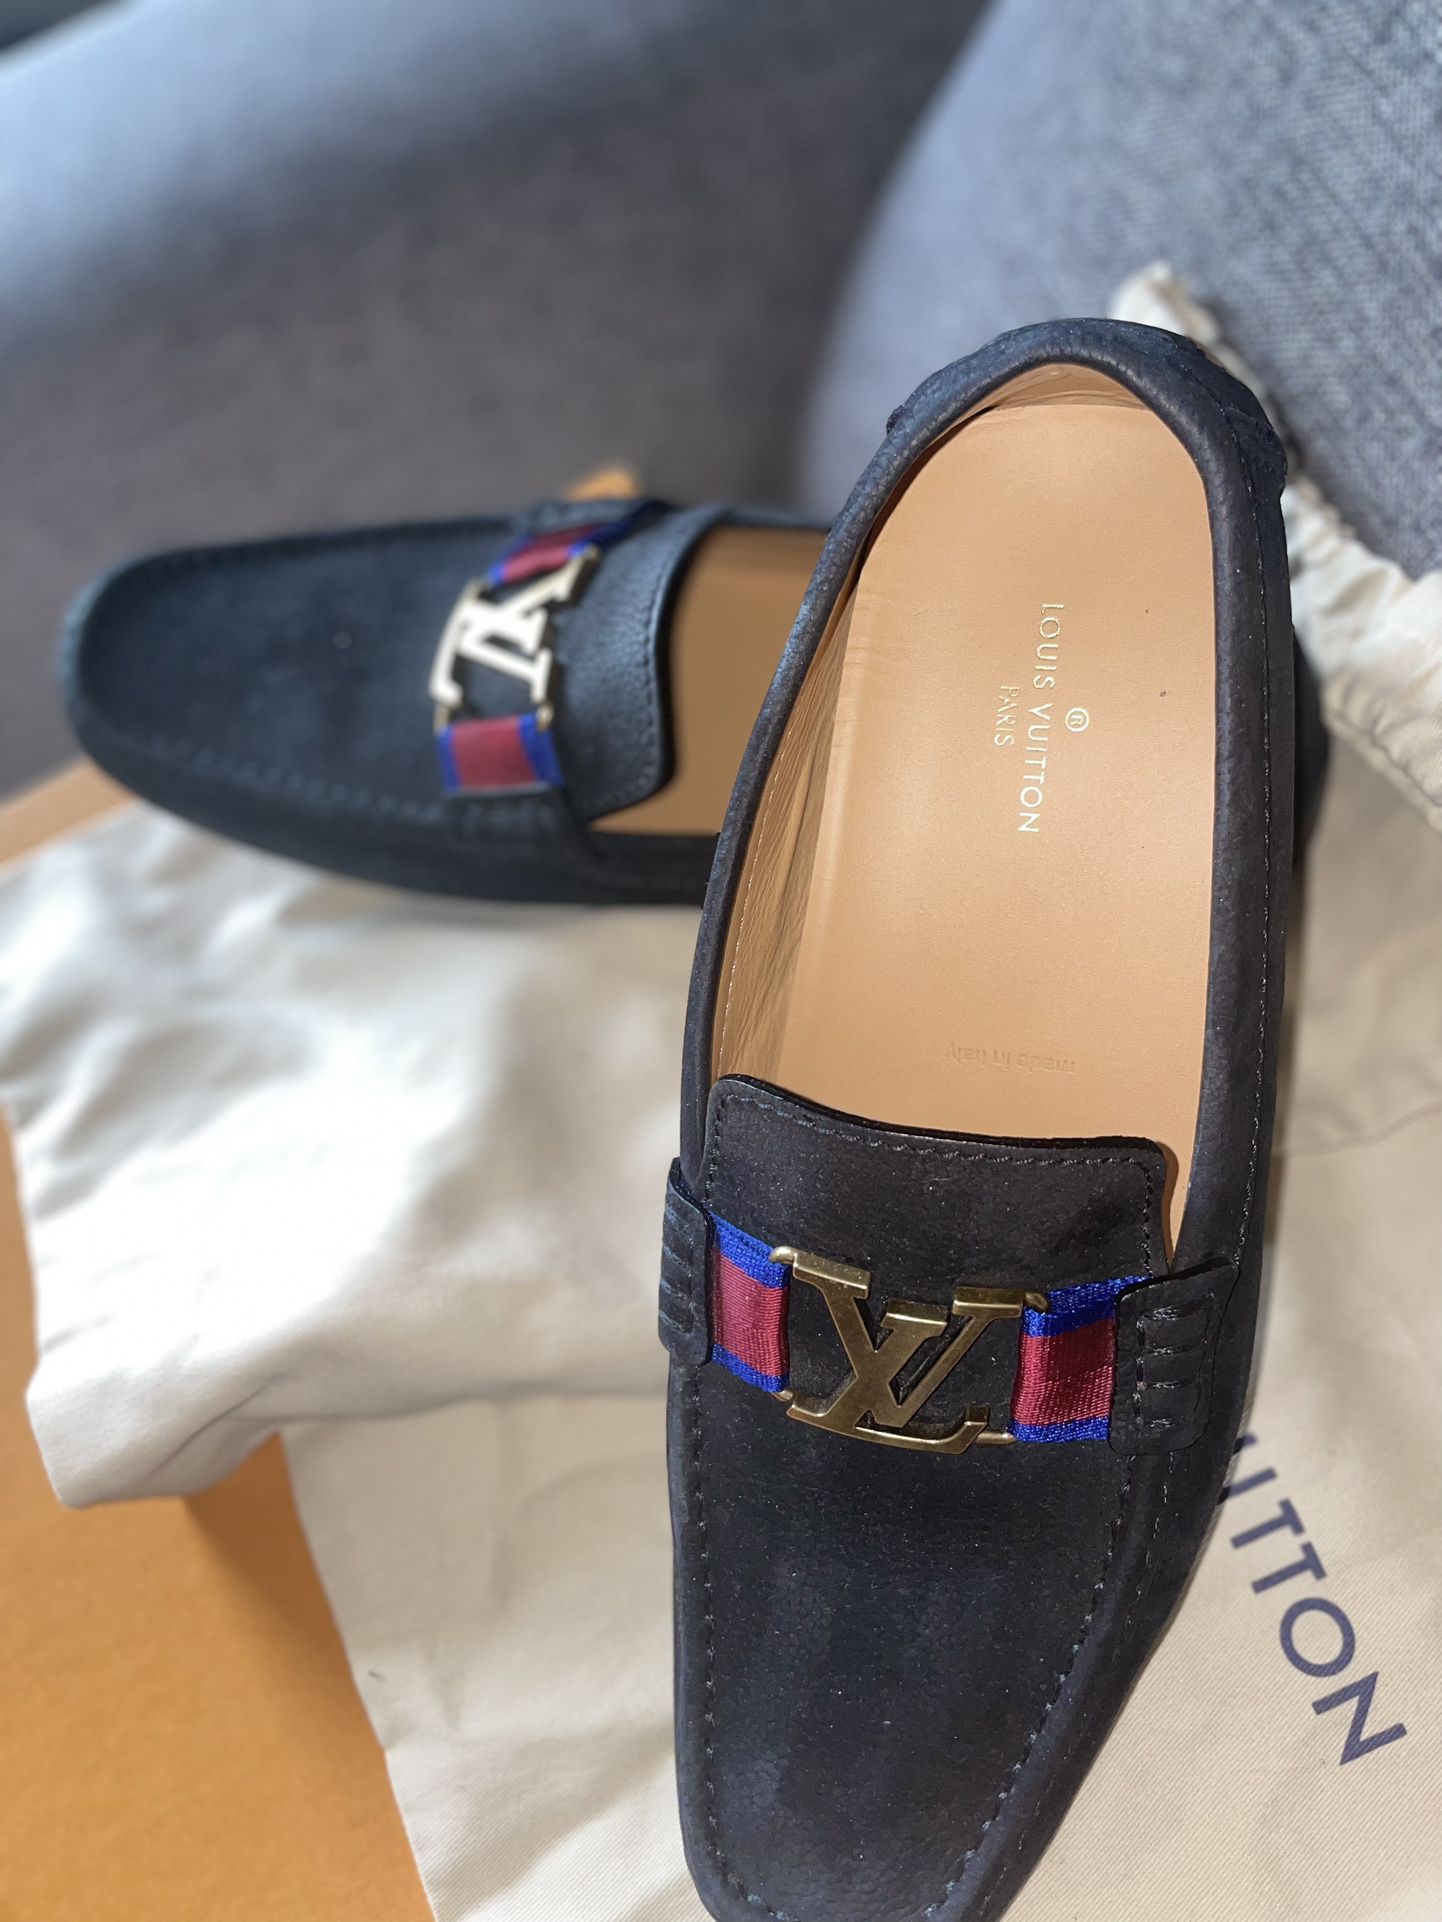 Louis Vuitton Driver Moccasin for Sale in New York, NY - OfferUp